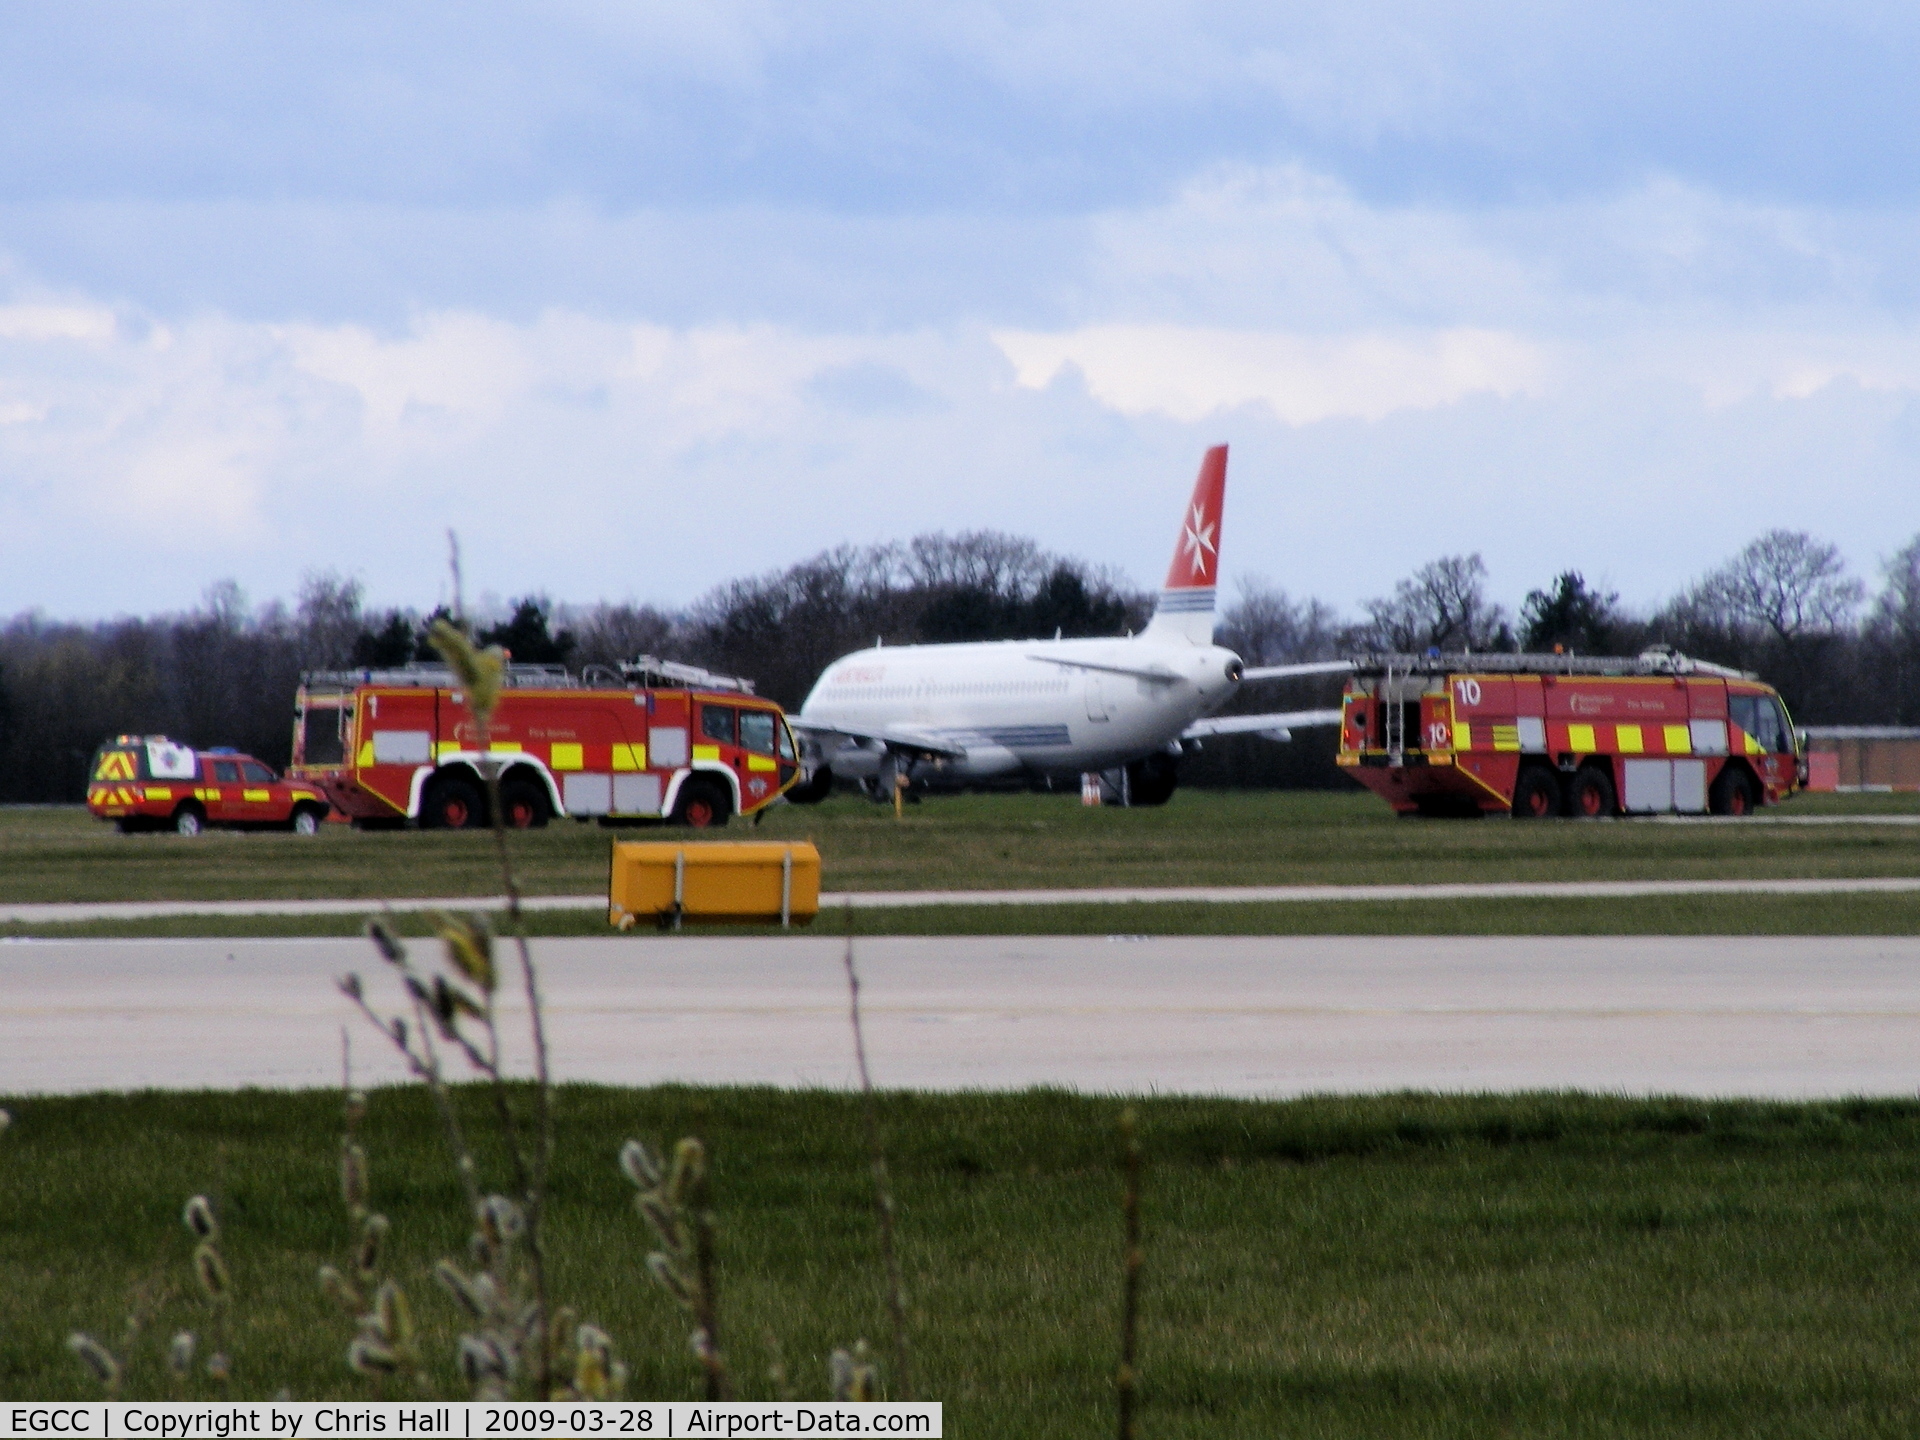 Manchester Airport, Manchester, England United Kingdom (EGCC) - Air Malta A319 9H-AEI made an emergency landing with all the fire trucks in attendance